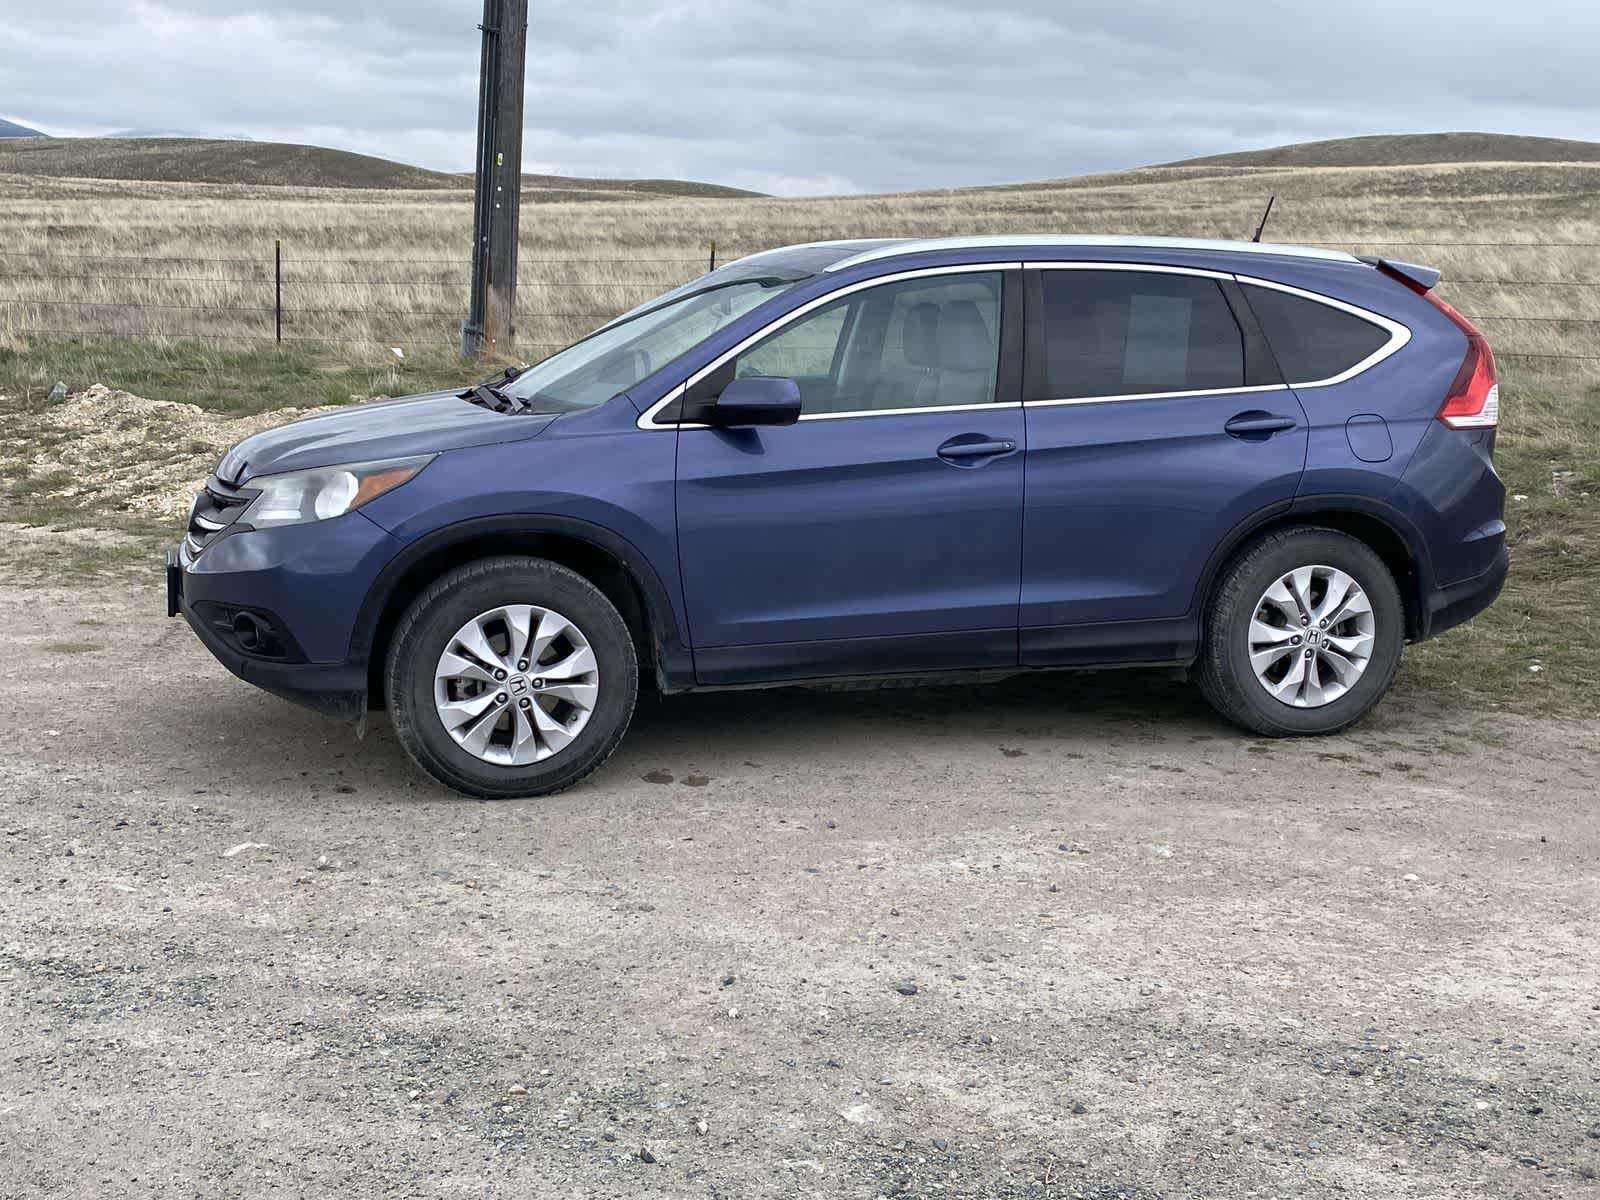 Used 2013 Honda CR-V EX-L with VIN 2HKRM4H74DH686881 for sale in Helena, MT